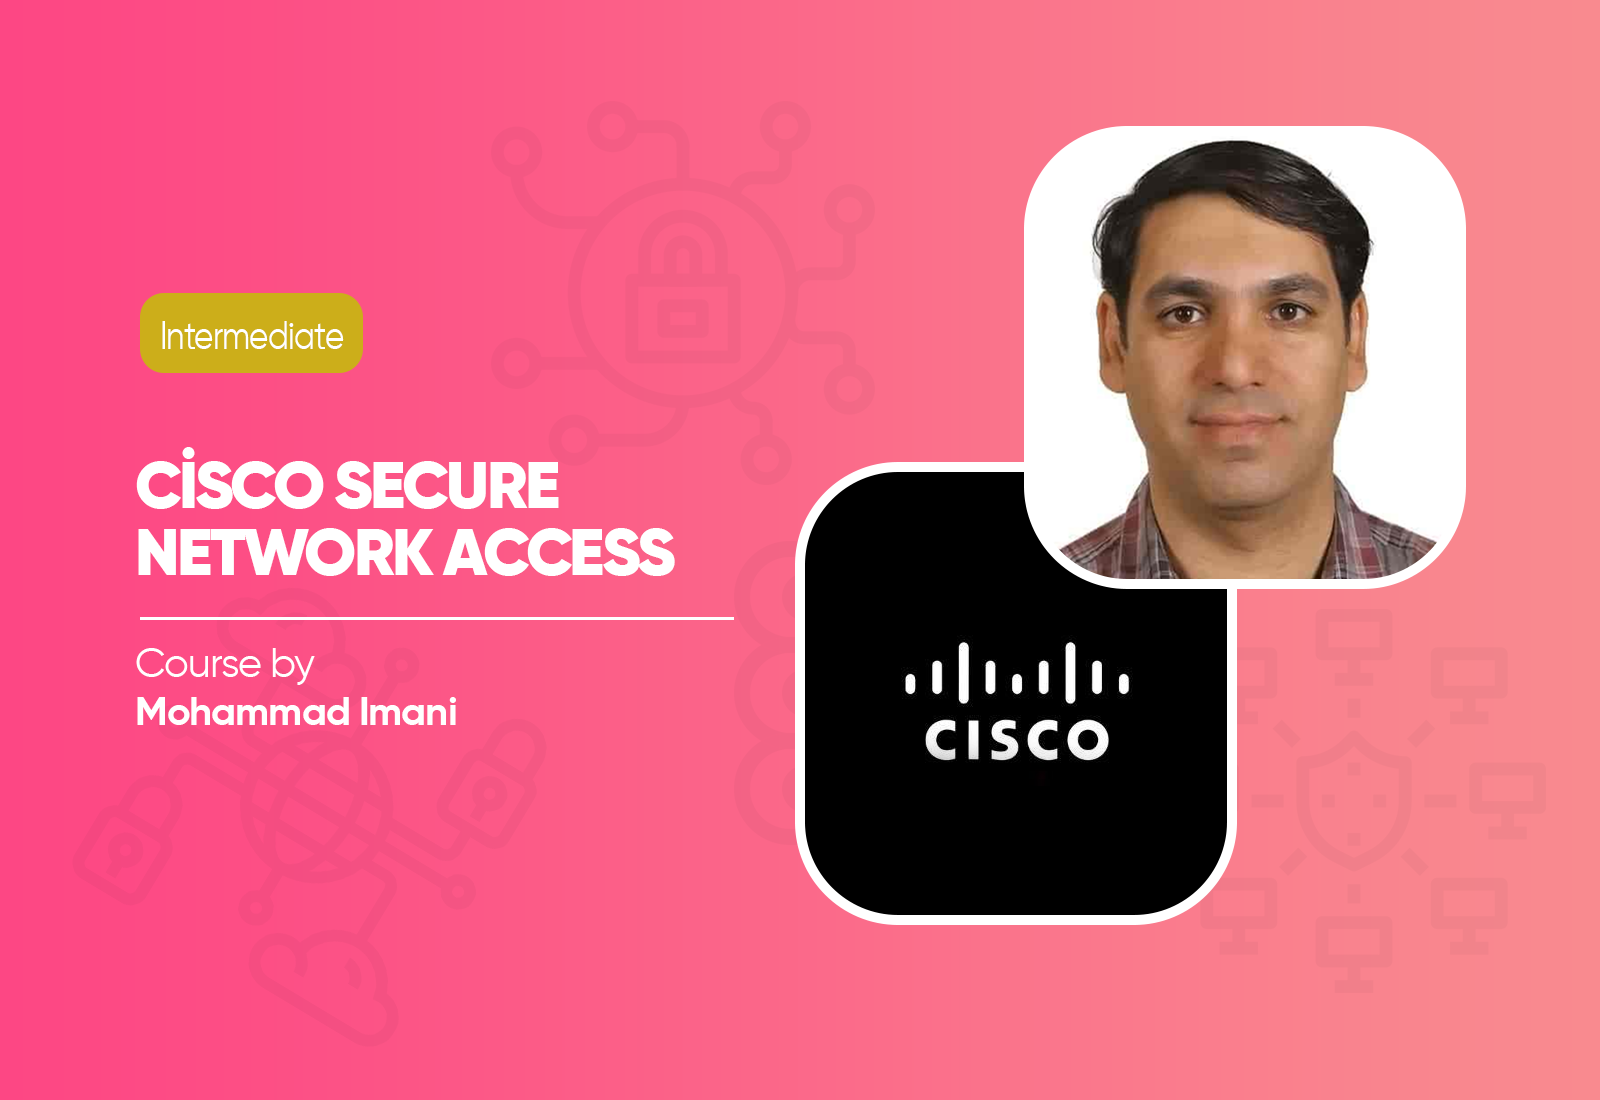 Cisco Secure Network Access 